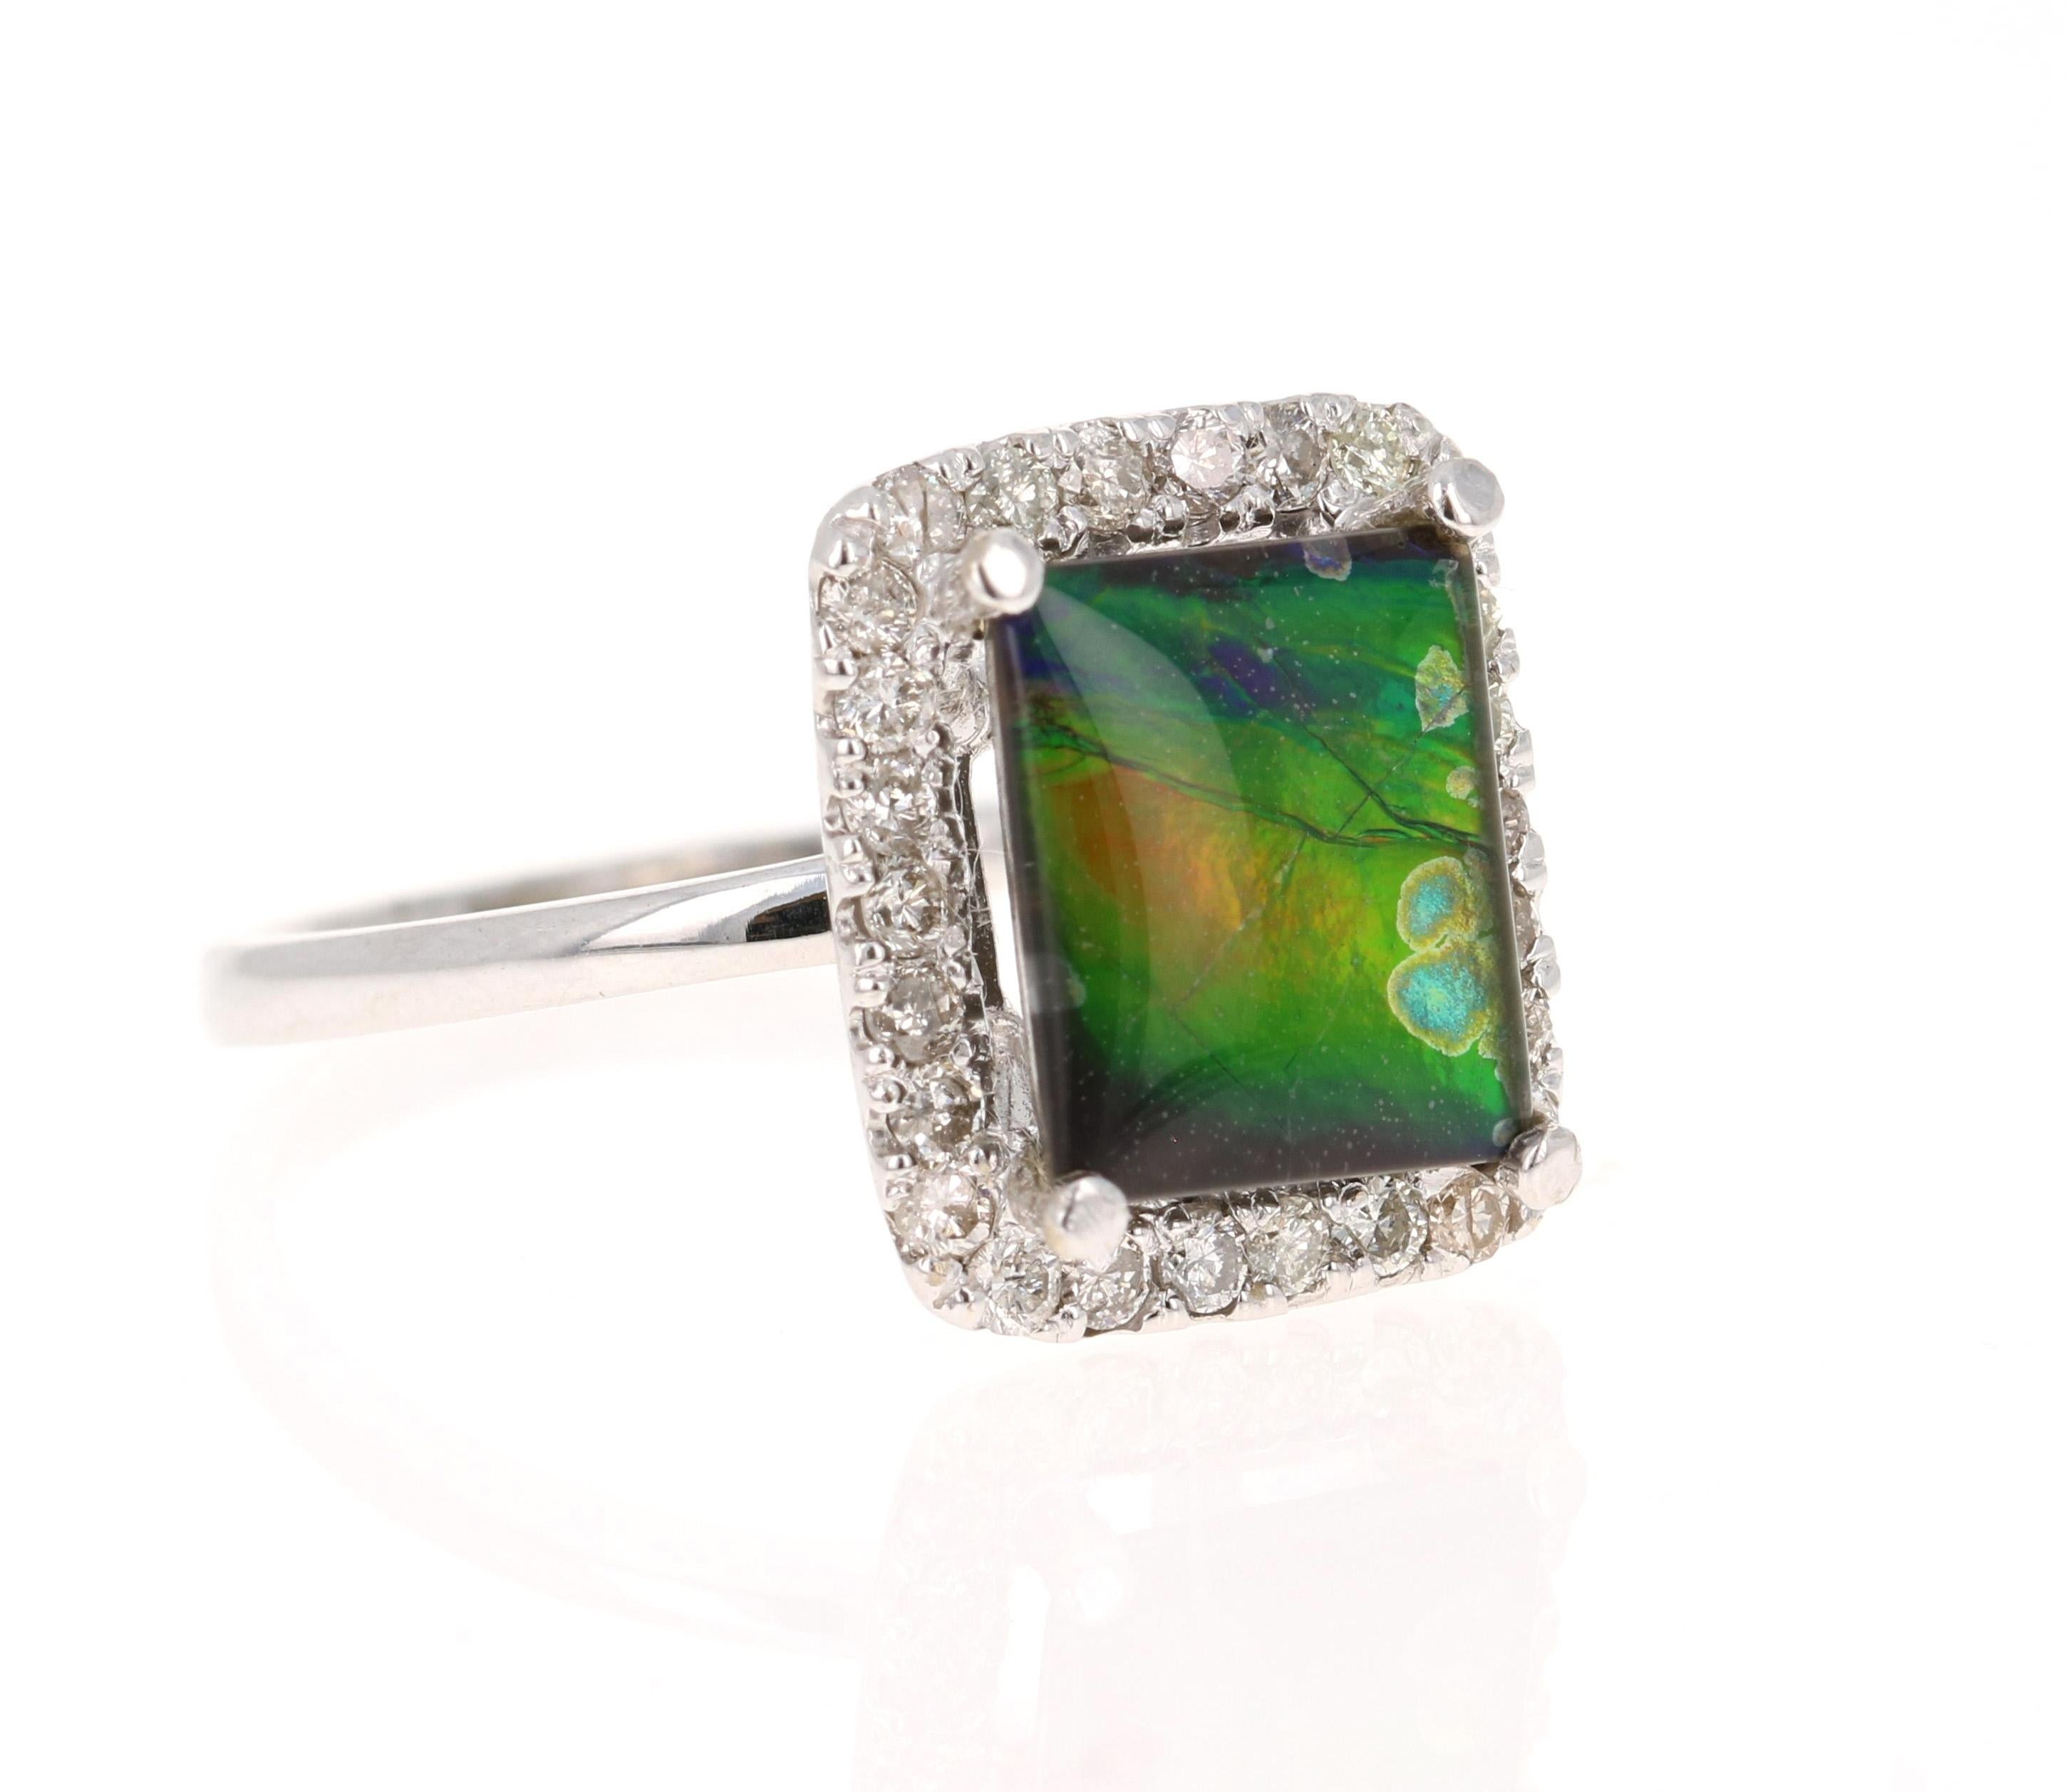 This unique ring has a Emerald Cut 2.15 Carat Amolite.  '

Amolite is an Opal-like organic gemstone that is primarily found in the eastern slopes of the North American Rocky Mountains. The Amolite has hues of green, blue, yellow & red and the lines